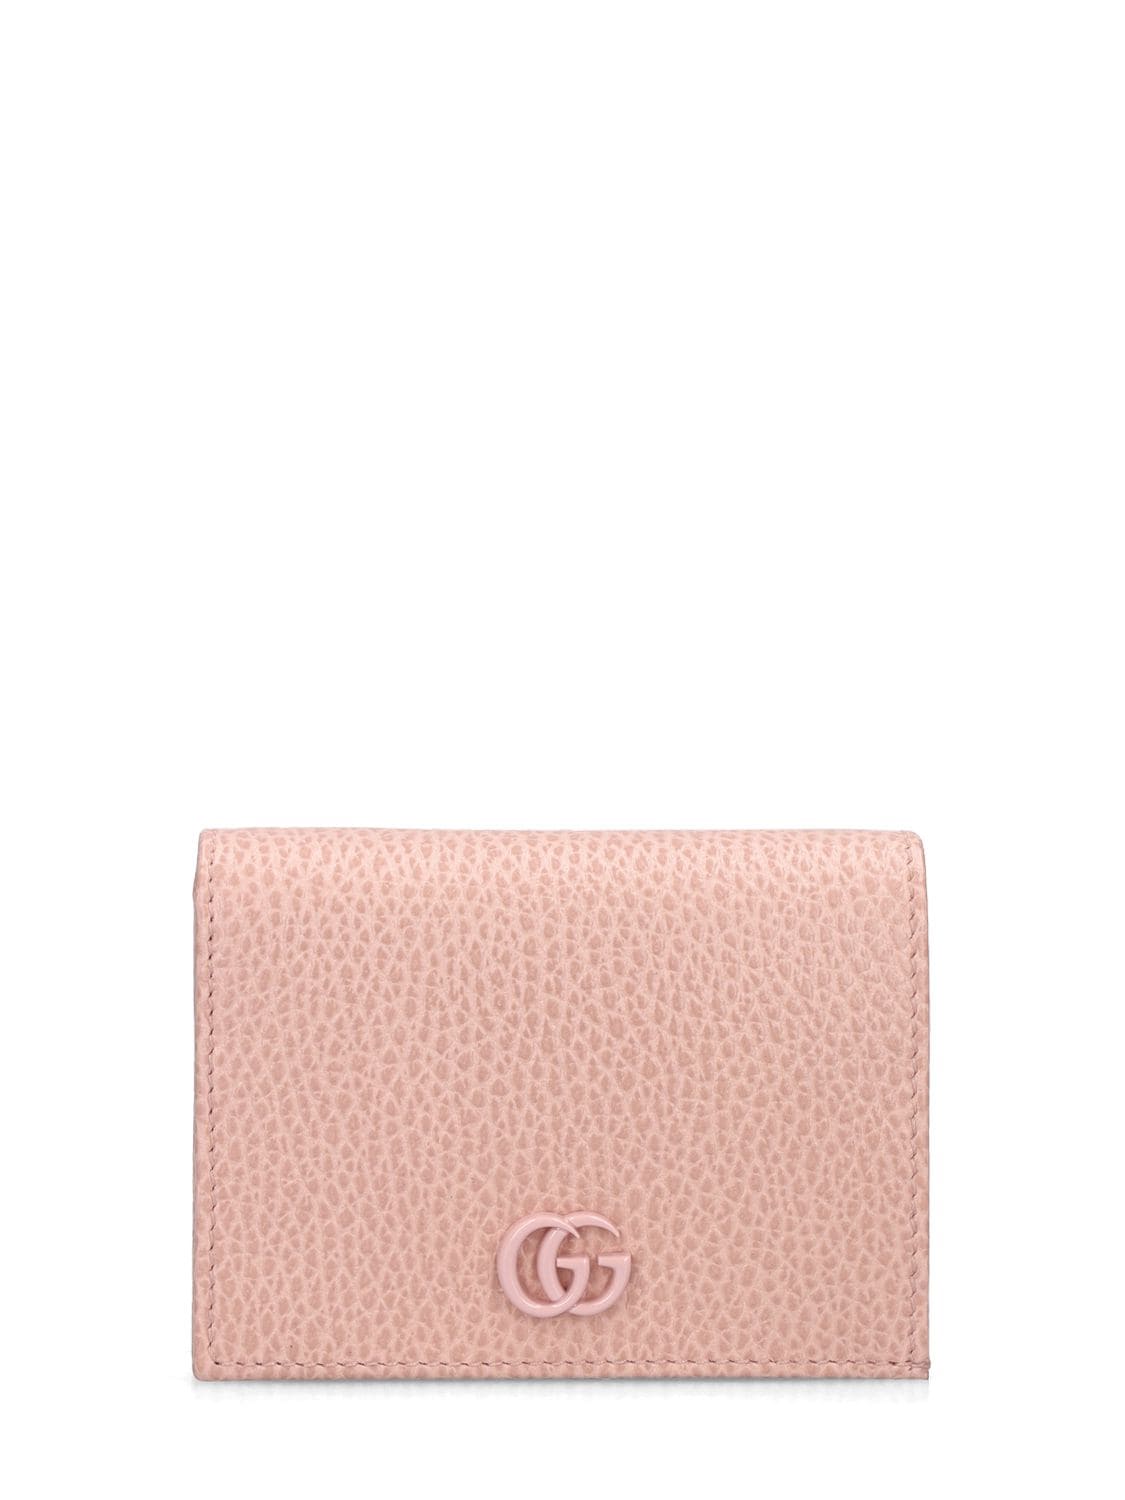 GUCCI Gg Leather Compact Wallet